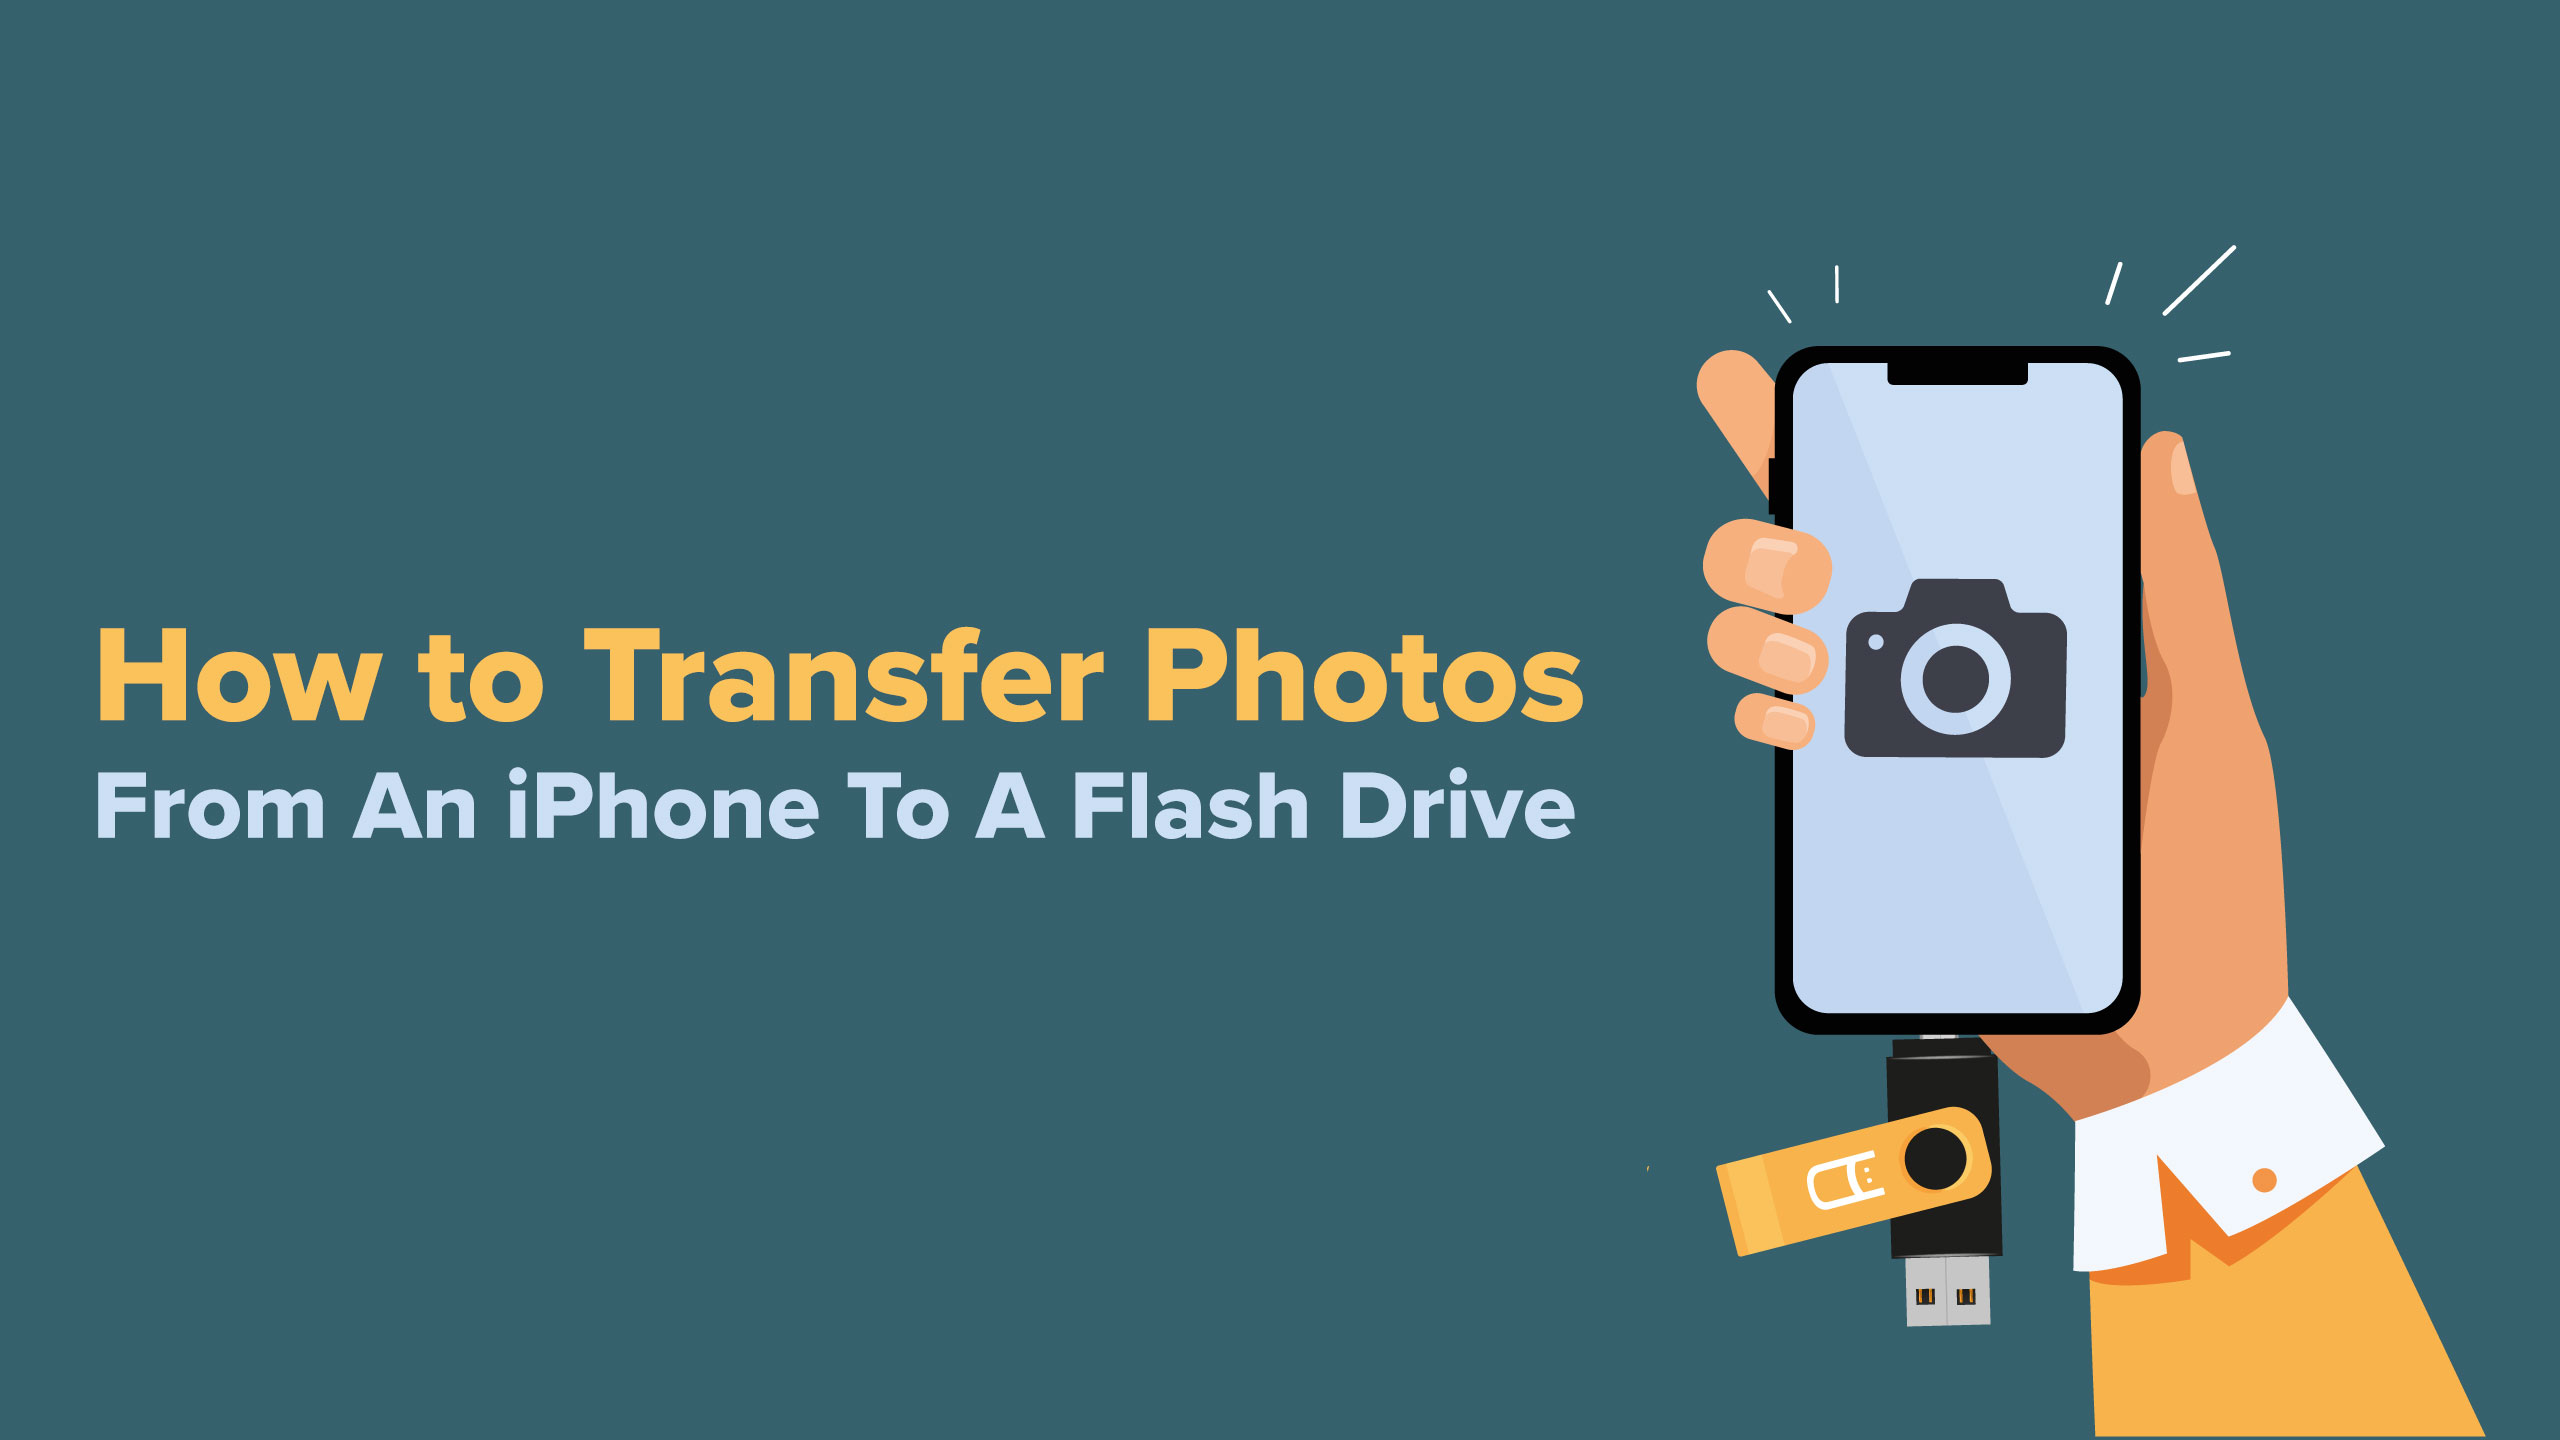 How to Transfer Photos from an iPhone to a Flash Drive